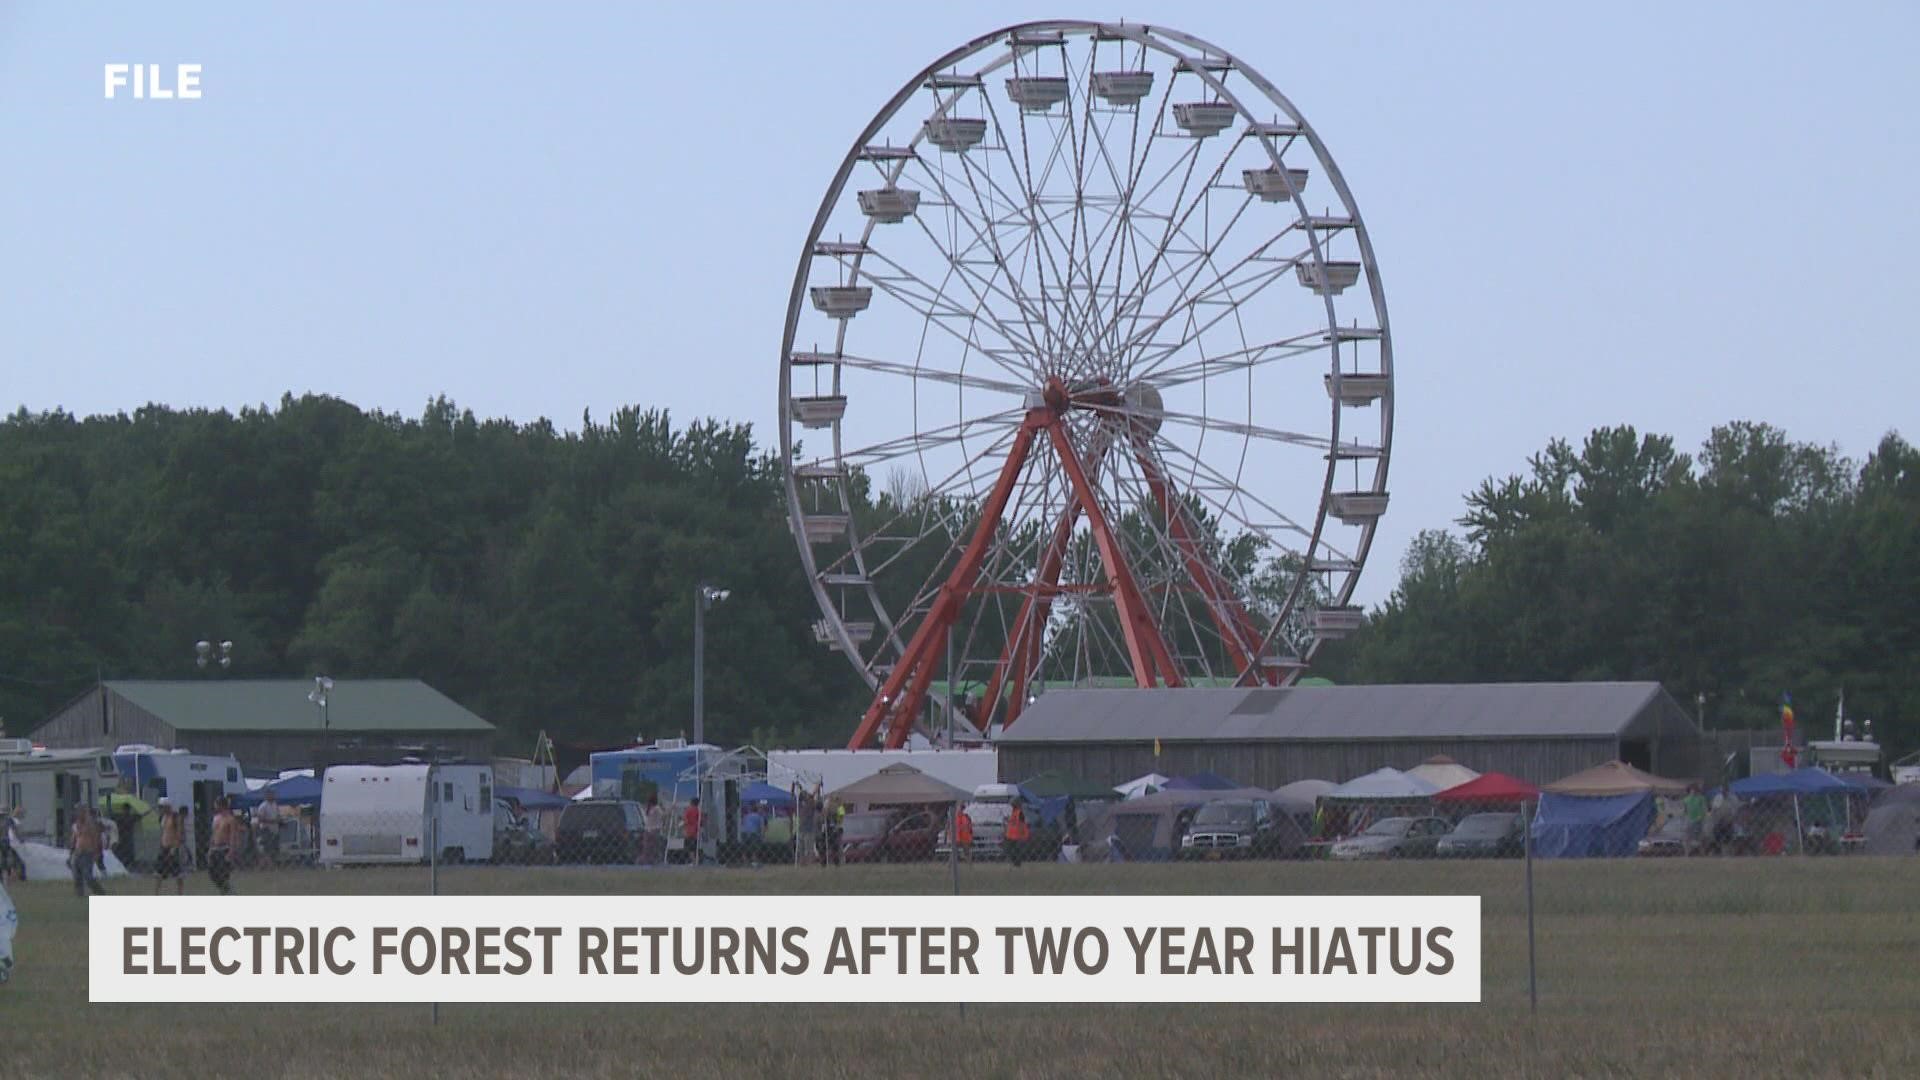 For the first time since 2019, music fans from around the country are traveling to West Michigan for the Electric Forest Festival.